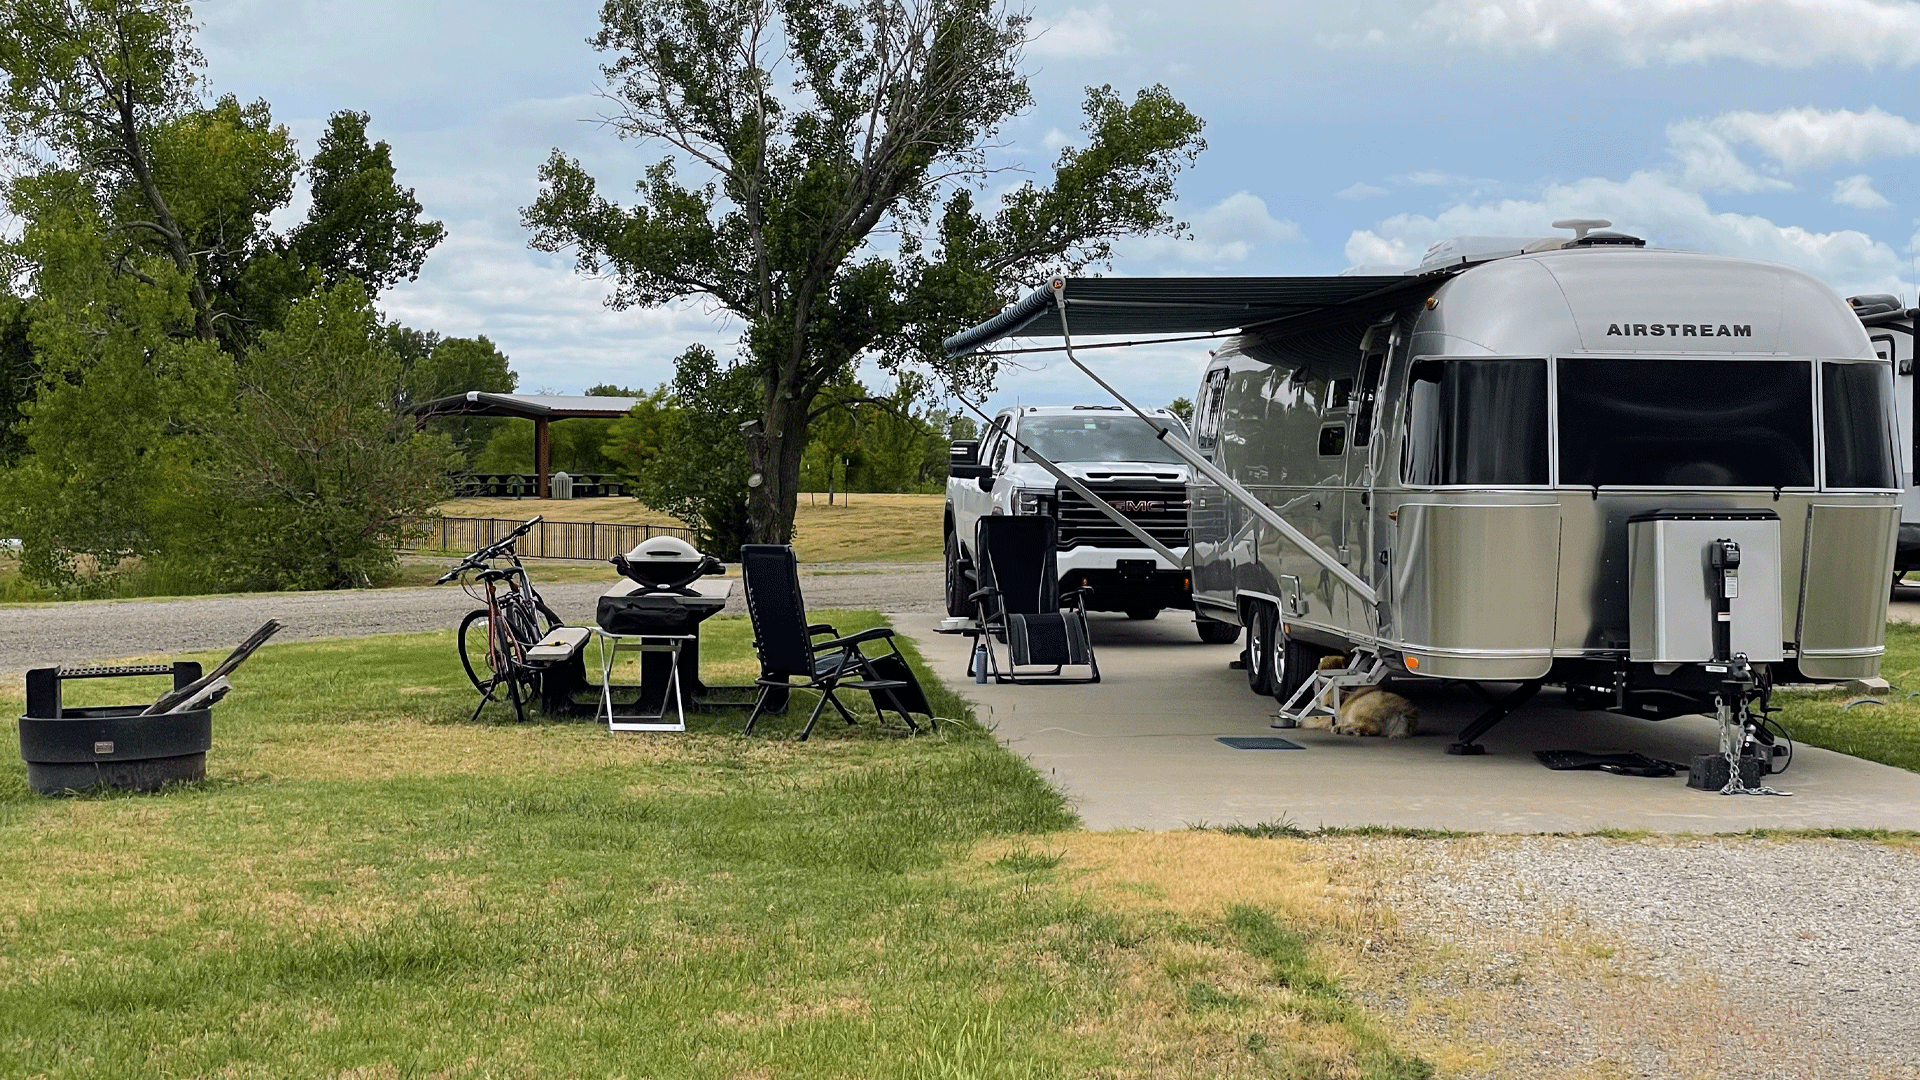 An Airstream camper parked at a campsite in El Dorado with a dog laying under the trailer and a truck parked behind.